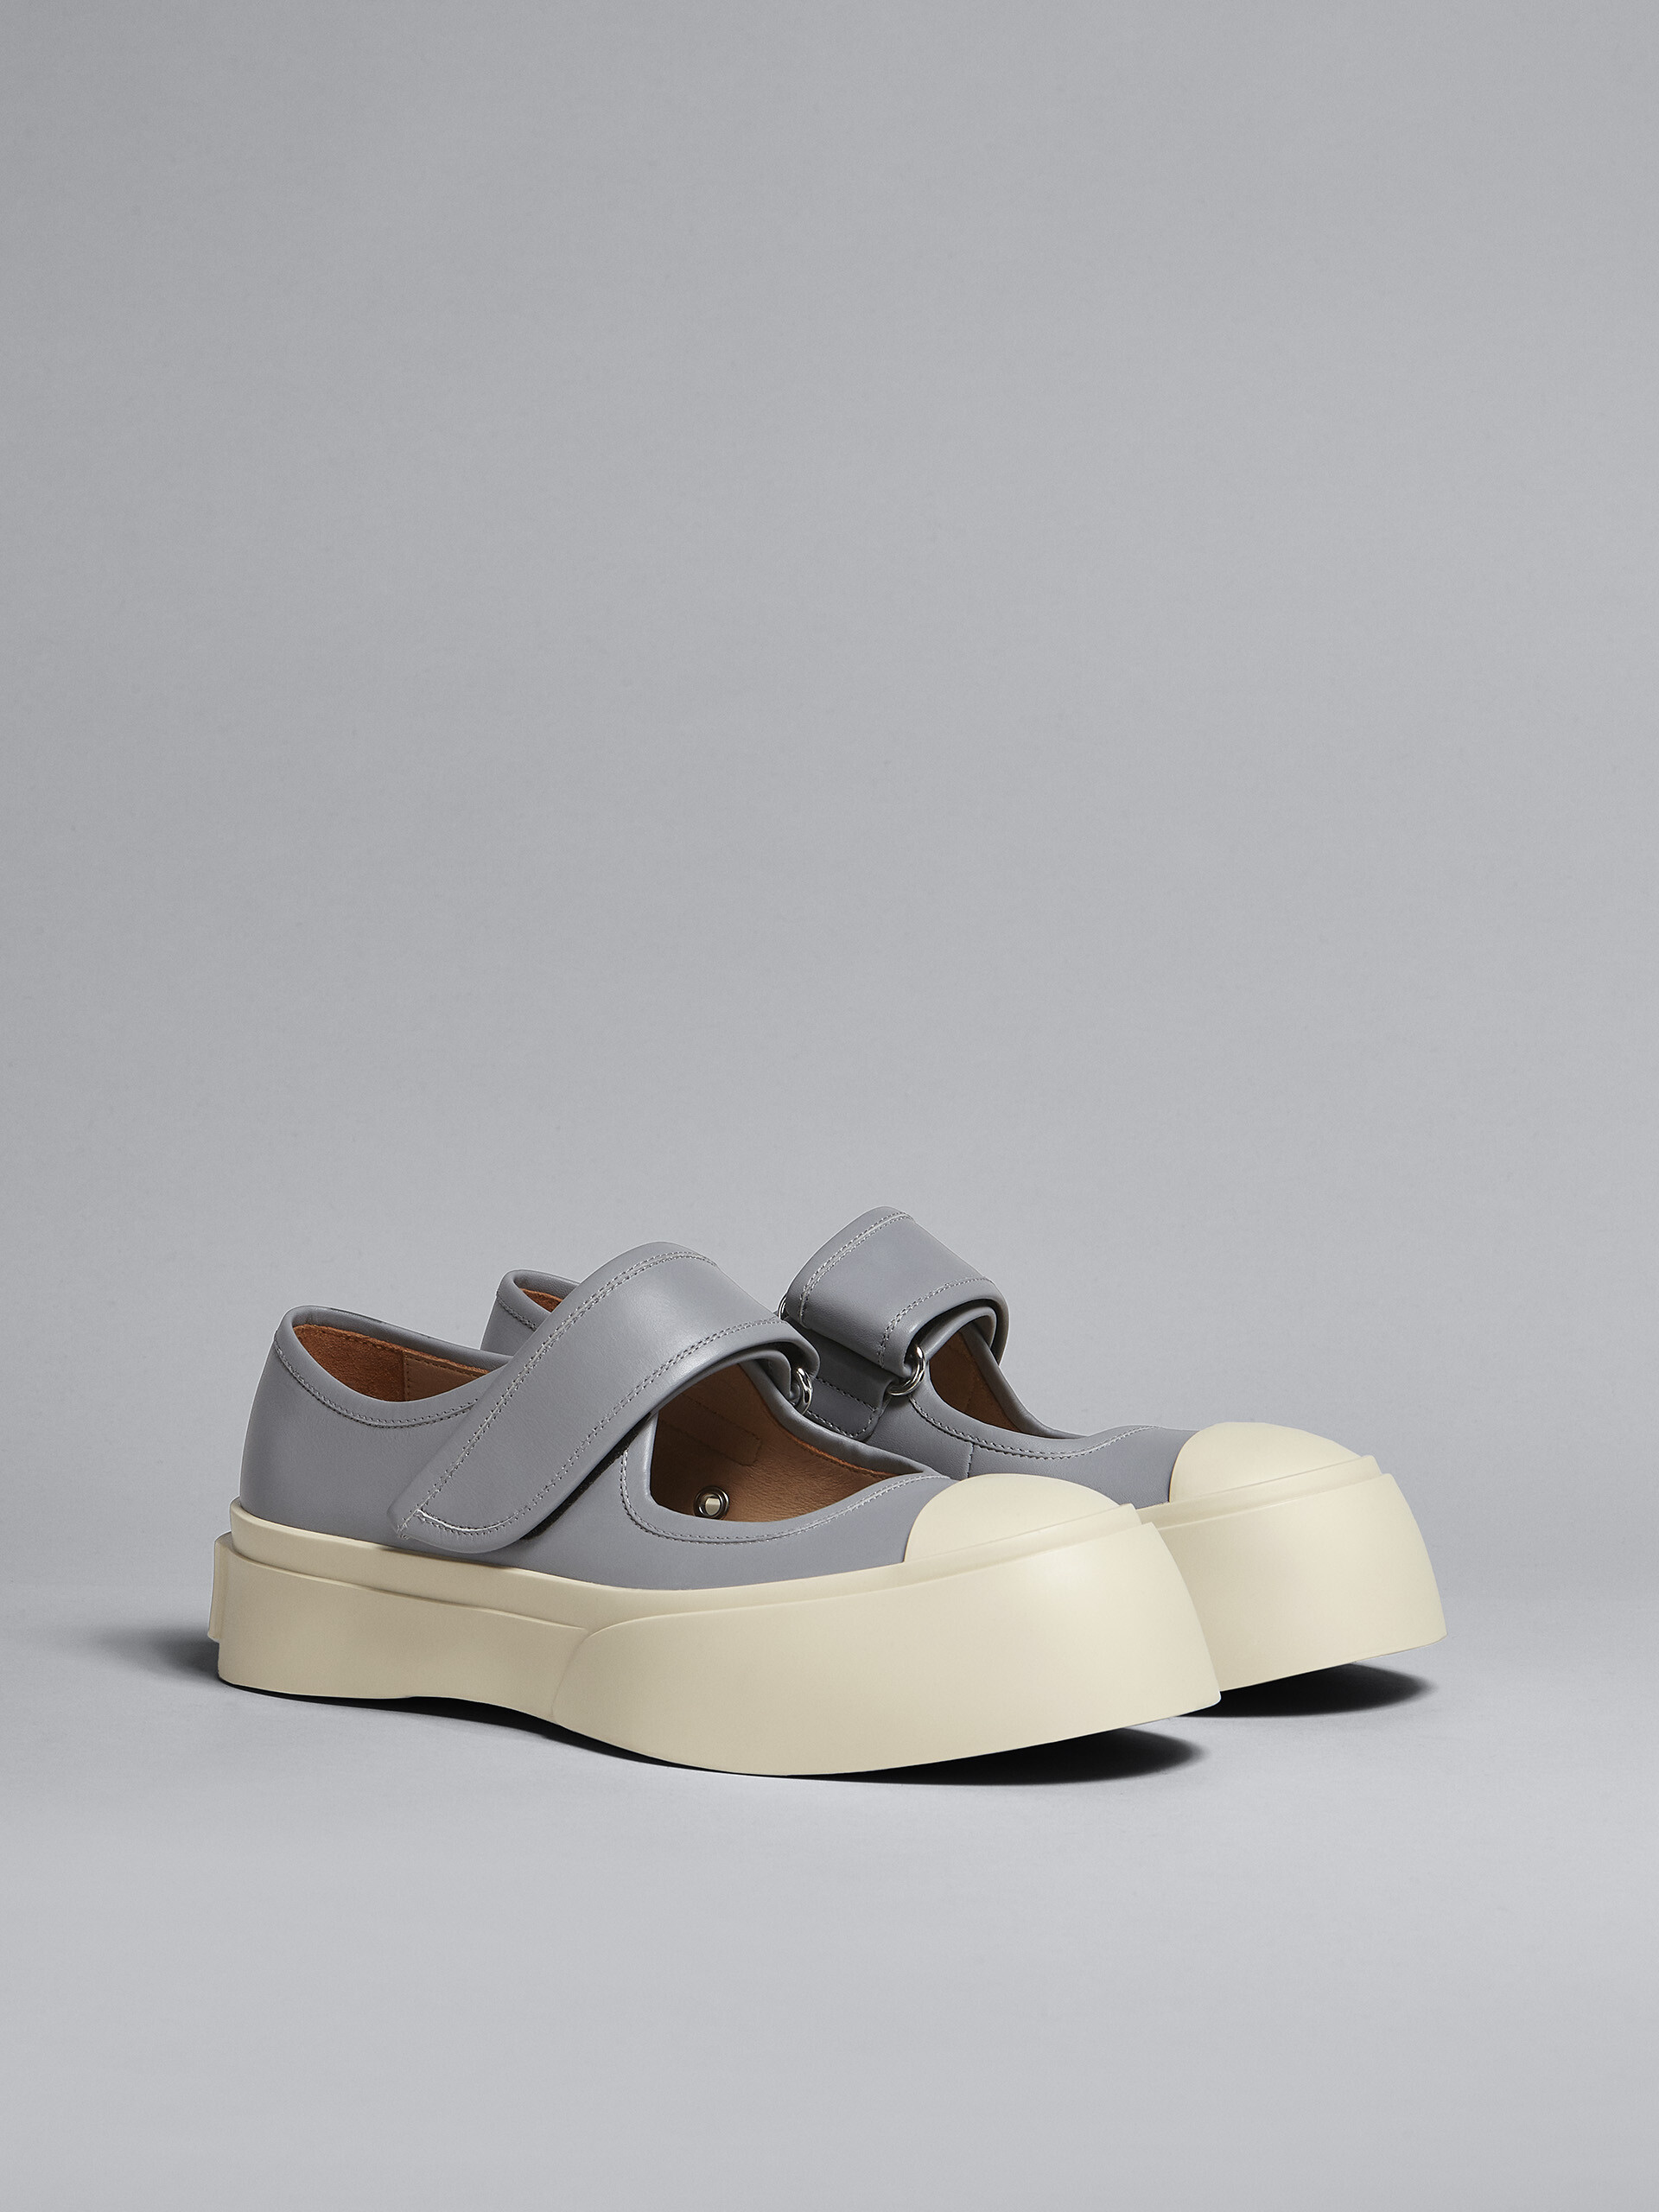 Grey leather Mary Jane sneaker - Sneakers - Image 2